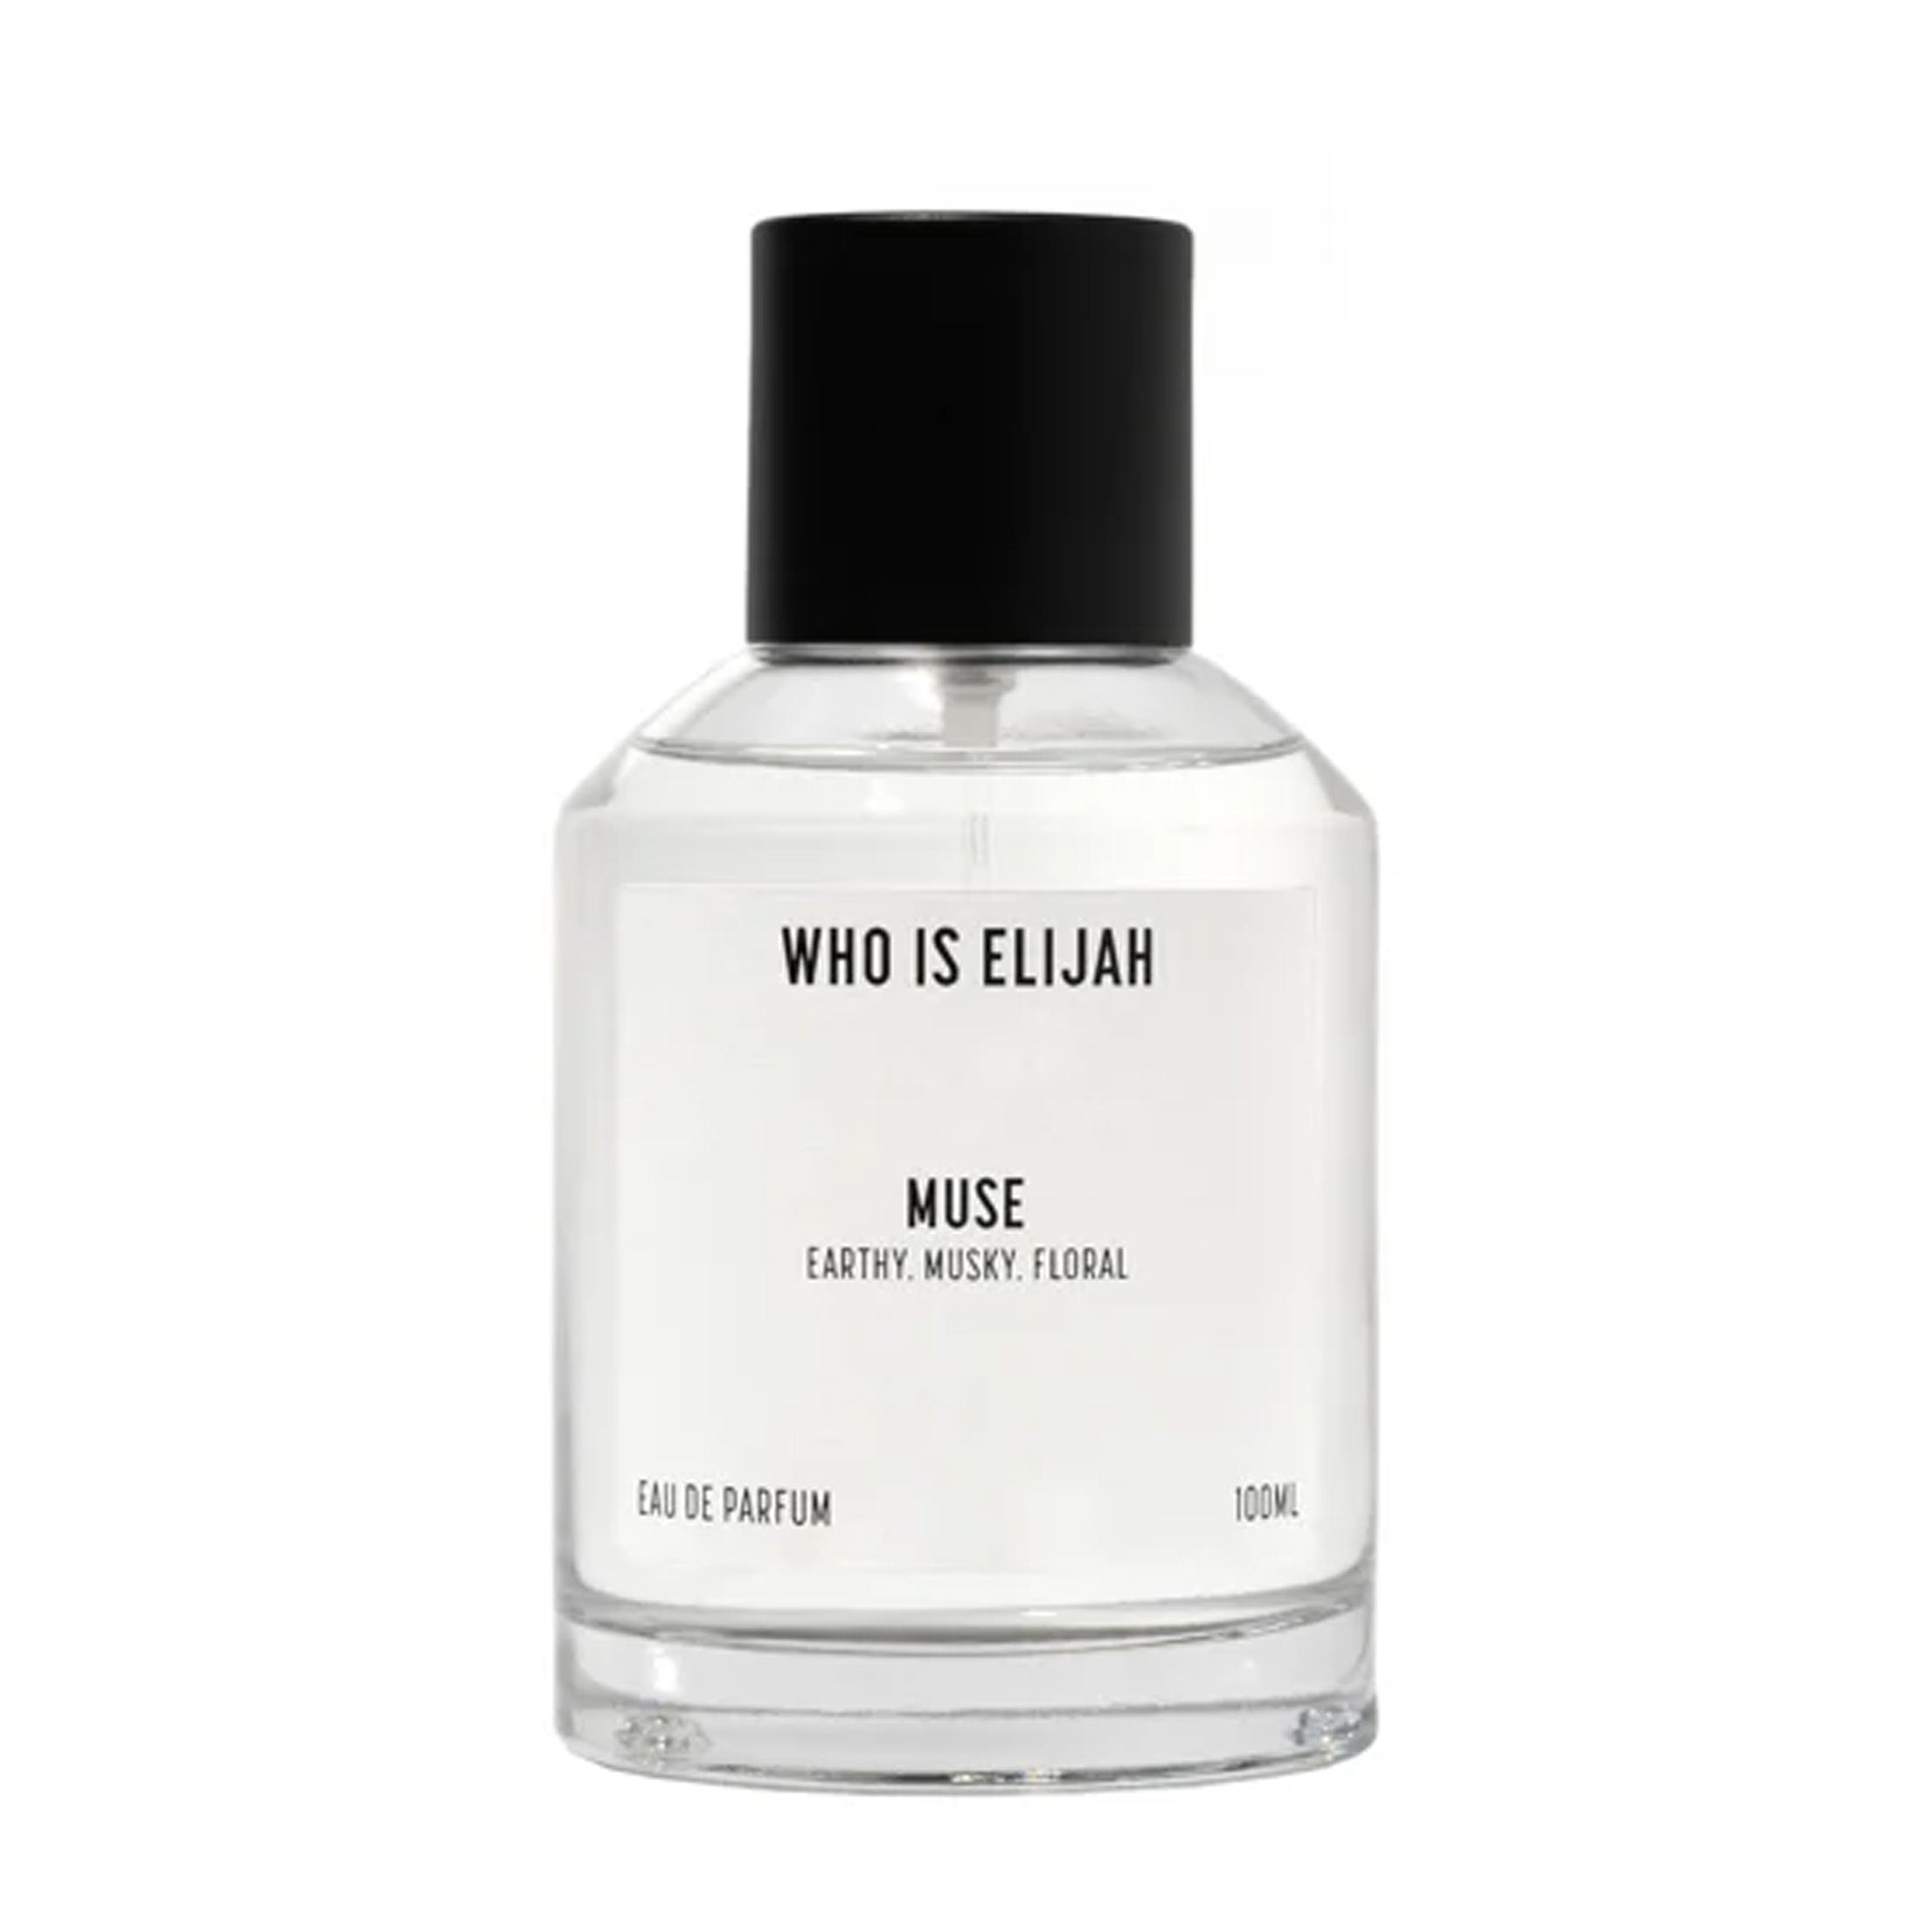 who is elijah MUSE 100ml